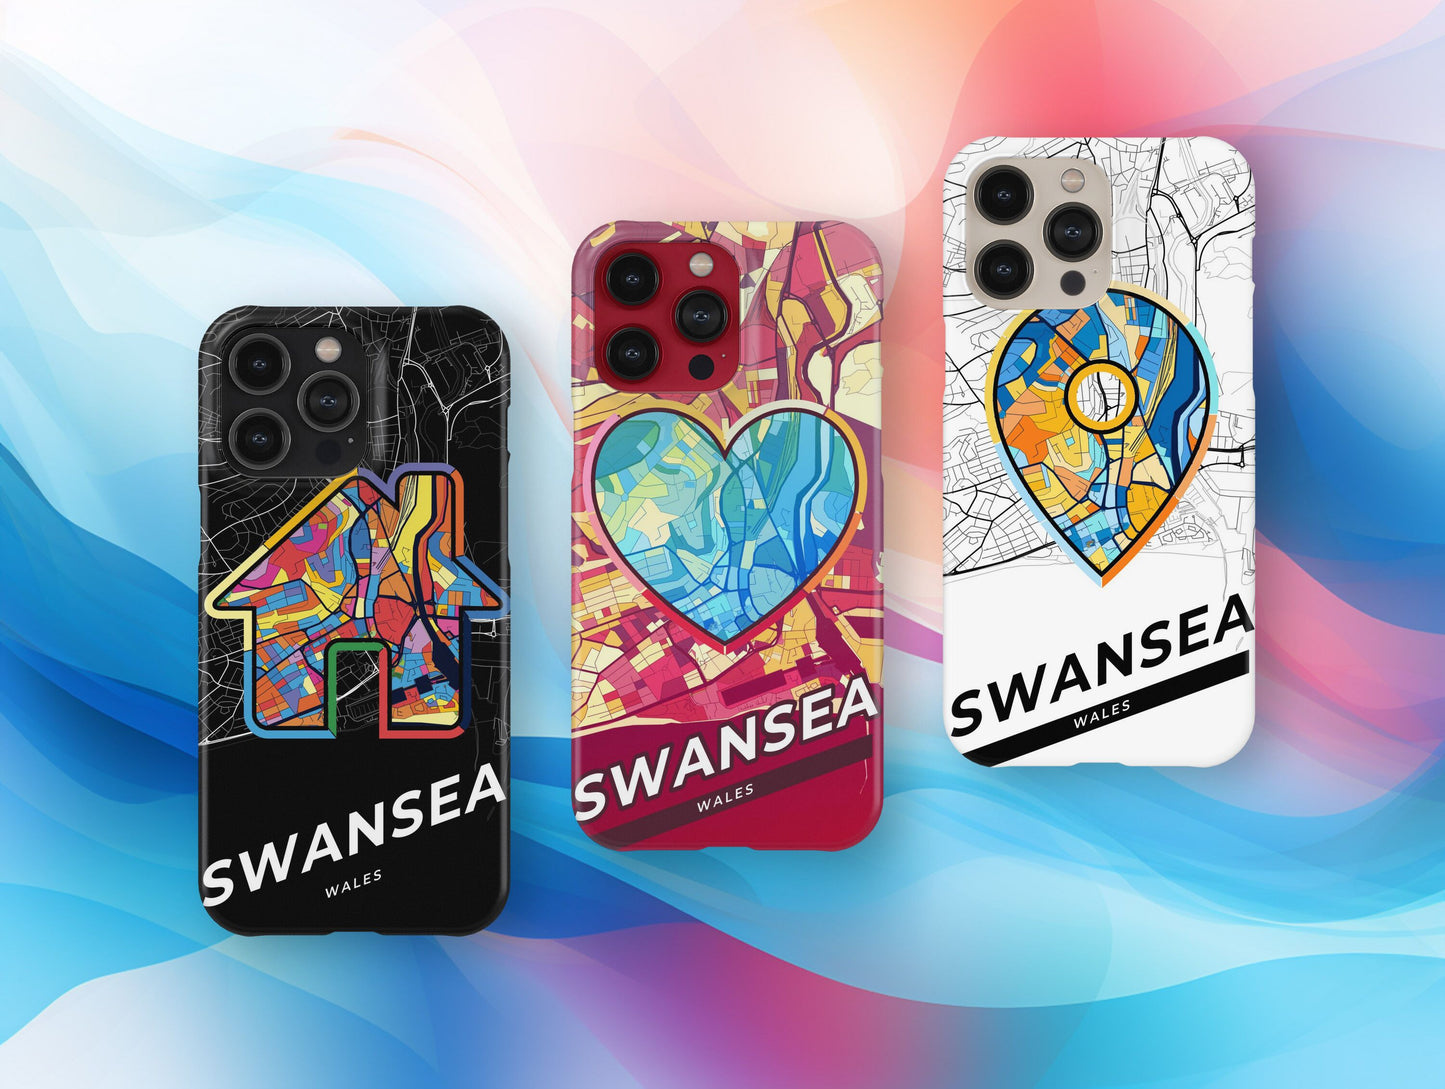 Swansea Wales slim phone case with colorful icon